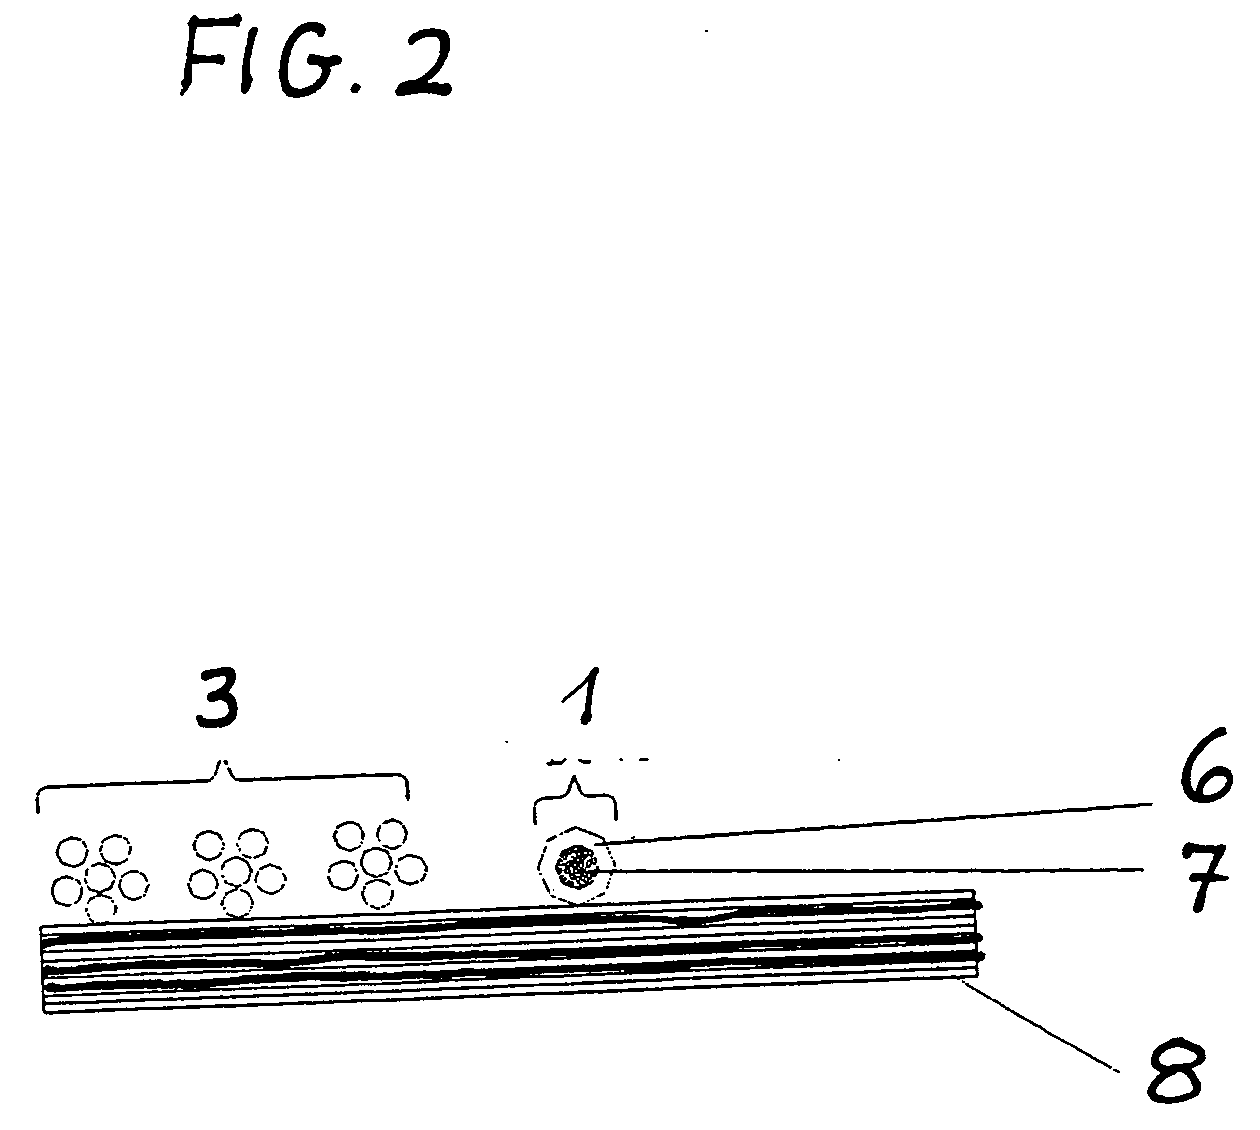 Monitoring device for flexible heating elements